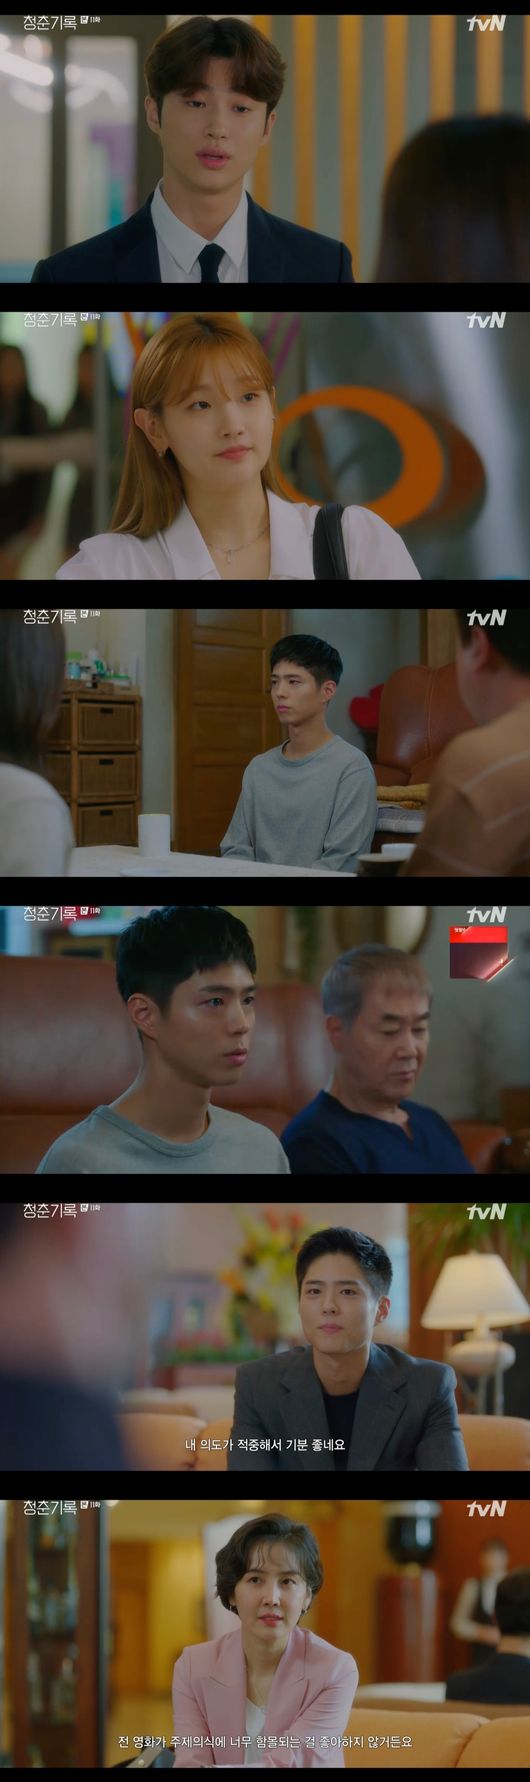 Record of Youth Park Bo-gum was caught up in sexual minority rumors, and family members began to distrust Shin Dong-mi, a management representative who showed a somewhat complacent attitude.In the news of Charlie Jung (Lee Seung-jun)s death, Sa Hye-joon (Park Bo-gum), who is being investigated by a reference person at the police station, was portrayed on TVNs Record of Youth broadcast on the afternoon of the 12th.On this day, Kim I-young (Shin Ae-ra), who is a Record of Youth, was uncomfortable when Sa Hye-joons popularity increased more than his son Won Hae-hyo (Wooseok).Especially, Kim Lee Young-eun, as he was in the past, disapproved of the desire to be close to Sa Hye-joon, saying, I can not sleep for a while.I cant lift my face in front of my dad, he complained.Especially, I remember the fact that I had forced reconciliation with Lee Chang-hoon, who had a bad relationship in the past, to make Kim Lee Young-eun Won Hae Hyo appear in a popular drama. Why would I deal with such a person if I were you?My mother is doing things that she really hates for you. Record of Youth Lee Min-jae (Shin Dong-mi) pushed Sa Hye-joon, who went to the police station without saying anything to himself.Unlike in the past, you have to be careful about your behavior. But Sa Hye-joon said, Are you a spirit or not? Do you know where you are?Is it more important than the death of a person? Do you want to live as a human being to calculate until that moment?Lee Min-jae said, Uh, I hope so. Do you know how many people want you to go down at this moment? You know there are still many evils.Why do you keep feeding those people? So, Sa Hye-joon said, Some people support me well. Look at the process of becoming a star. Its a miracle.How is this human power? I know my sisters heart, but thank you, I want to know my heart that I want to put a flower on my way to the teacher. Record of Youth An Jeong-ha (Park So-dam) met Won Hae-hyo and confessed that he would no longer be the makeup artist in charge.I wanted to do my own development while launching my makeup studio. I know you always call me makeup business for me, but I want to stop now.I will not always have to wait, but I will go to a specific event. I have not told Hye Jun yet. Won Hae-hyo, who heard this, said, I like what I said first, suggesting that the love for An Jeong-ha still did not cool down.Lee Min-jae, who is known as Record of Youth, eventually decided to sue Sa Hye-joons evil spirits, and Lee Min-jae, who said, It is also a proof that I became a star, said, Did you check the bankbook?You do not have a room in the house where you live now. I move to Gangnam. Record of Youth Kim Soo-man (Bae Yoon-kyung) began to dig into the homosexual rumors of Charlie Jung and Sa Hye-joon.Lee Tae-soo (Lee Chang-hoon) met with Charlie Jung and Sa Hye-joon to investigate the relationship. Kim Soo-man told Lee Min-jae, Charlie Jung and Sa Hye-joon have a relationship.If you stay on that floor, you need money. You are not rich, he said, referring directly to Charlie Jung and Sa Hye Juns sponsor rumors.In various rumors, Sa Hye-joon and Ahn Jeong-has romance was solid. After completing the schedule, Sa Hye-joon waited at the stable house.Sa Hye-joon, who enjoyed a home date in earnest, expressed his infinite affection toward each other who was stable and honestly confessed the things he had been sad about and thanked for.Sa Hye-joon apologized, saying, I am sorry that I have not had much time together. And said, I can not do it only because you are not.I am the representative of Ahn Jung-ha Studio. Lee Min-jae was worried about publicizing the public devotion of Sa Hye-joon and Ahn Jung-ha to the world, but Sa Hye-joon was very opposed.Despite Ahn Jung-has statement, If Hye-joon is good, I do anything, Sa Hye-joon said, I want to protect my daily life.Record of Youth Won Hae-hyo introduced Kim Soo-man to her ex-girlfriend Ji-ah (Seo In-ah) to strip Sa Hye-joon of sexual minority rumors.However, Won Hae Hyo and Sa Hye Jun showed meaningful eyes to each other and formed a subtle atmosphere to amplify their curiosity about future development.On the other hand, tvN Record of Youth is a growth Record of Youth who try to achieve dreams and love themselves without despairing on the wall of reality. Park Bo-gum, Park So-dam, and Wooseok appear.It airs every Monday and Tuesday at 9 p.m.TVN Record of Youth